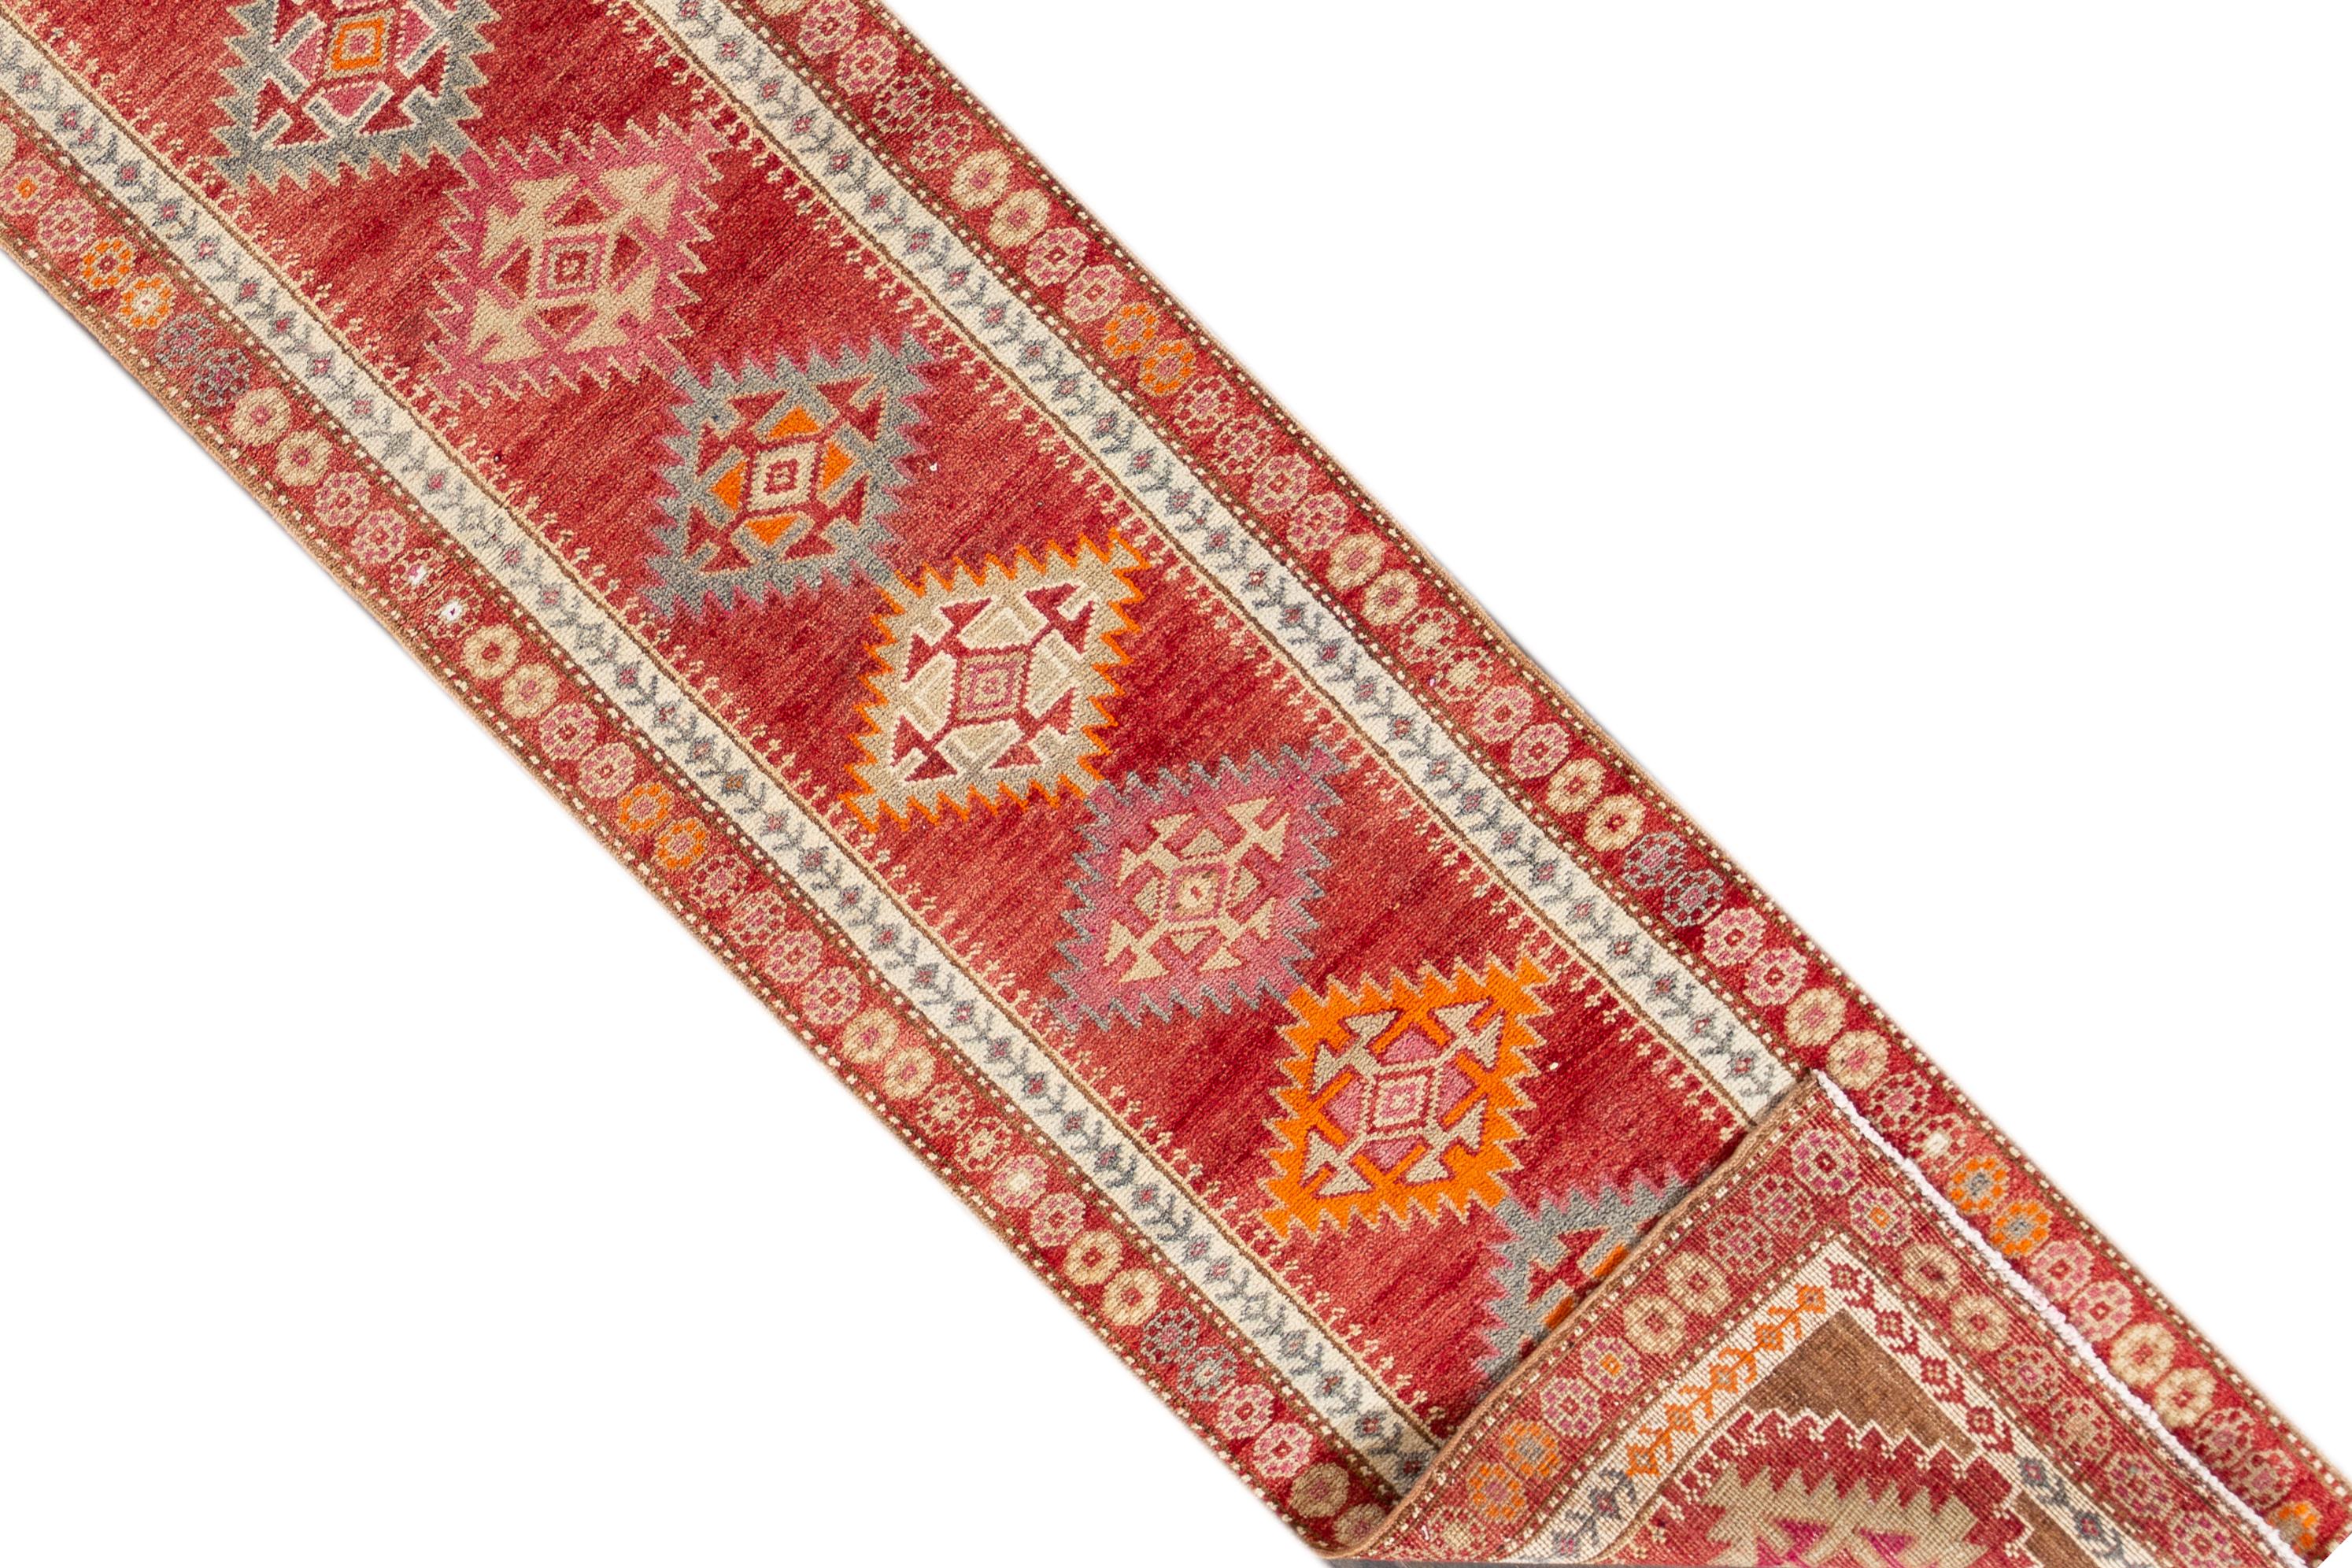 A 20th century vintage Turkish Anatolian runner rug with an all-over geometric motif. This rug measures at 2'8